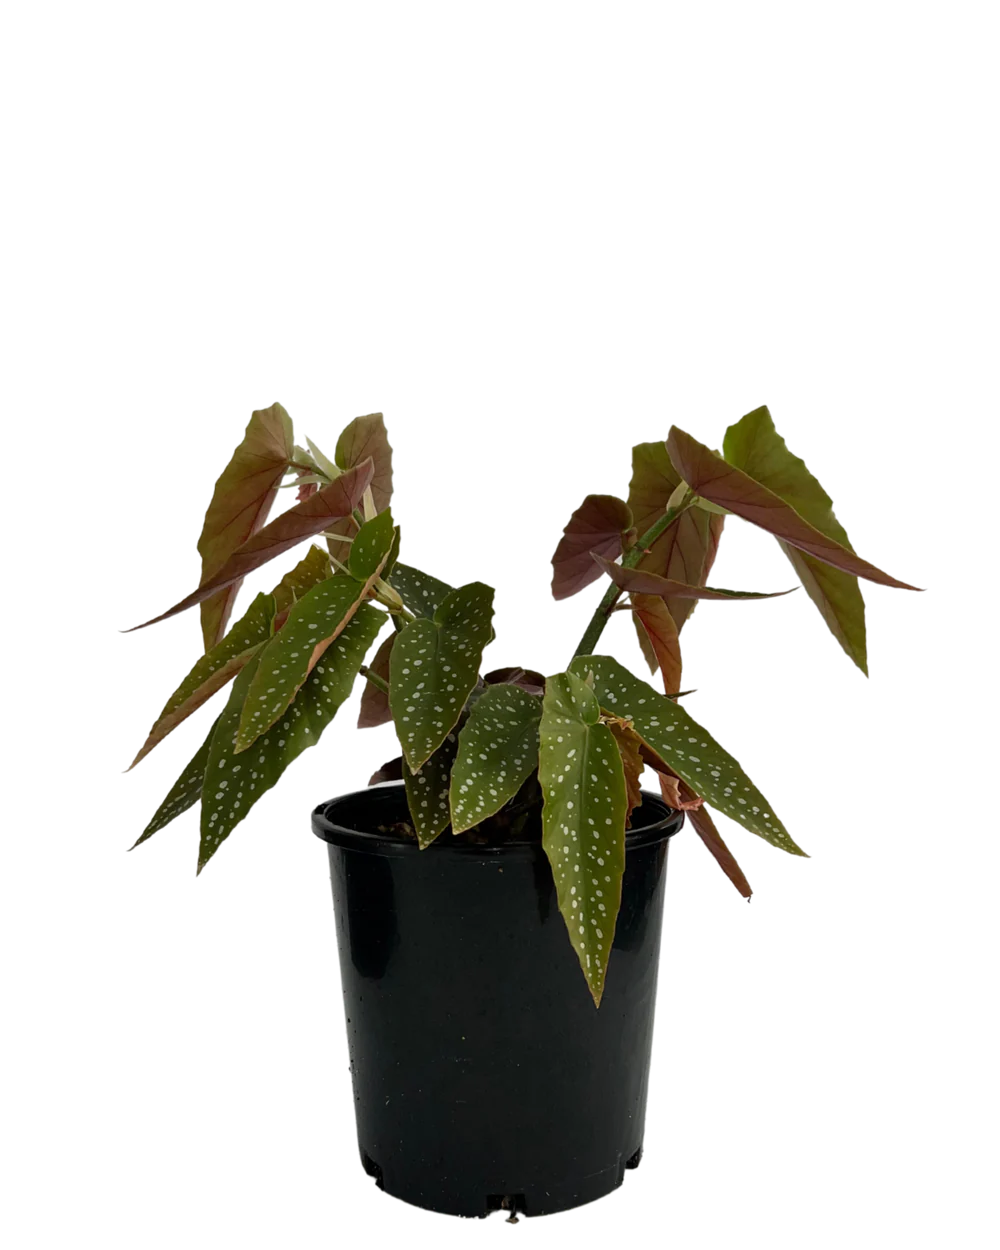 Begonia Maculata | How to Grow and Care for Begonia Maculata